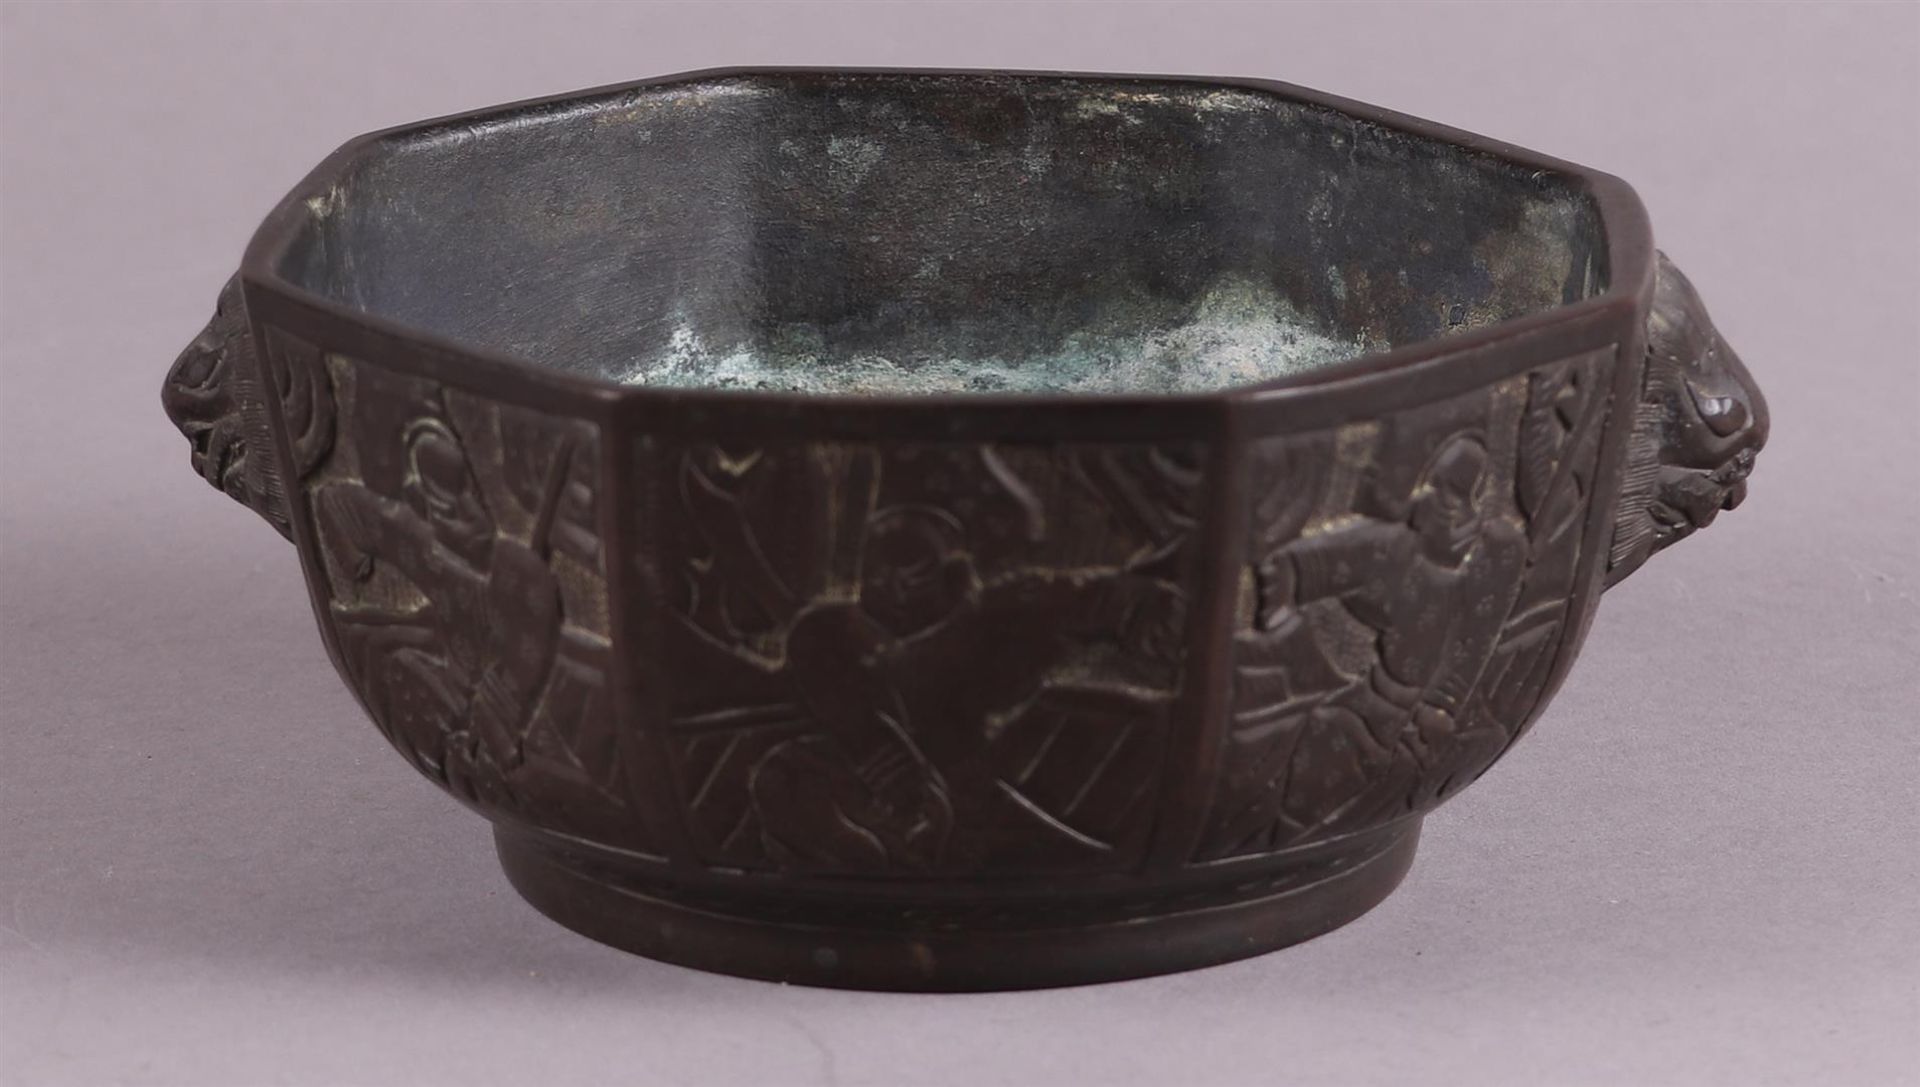 A bronze incense burner decorated with various figures. China, 19/20th century.